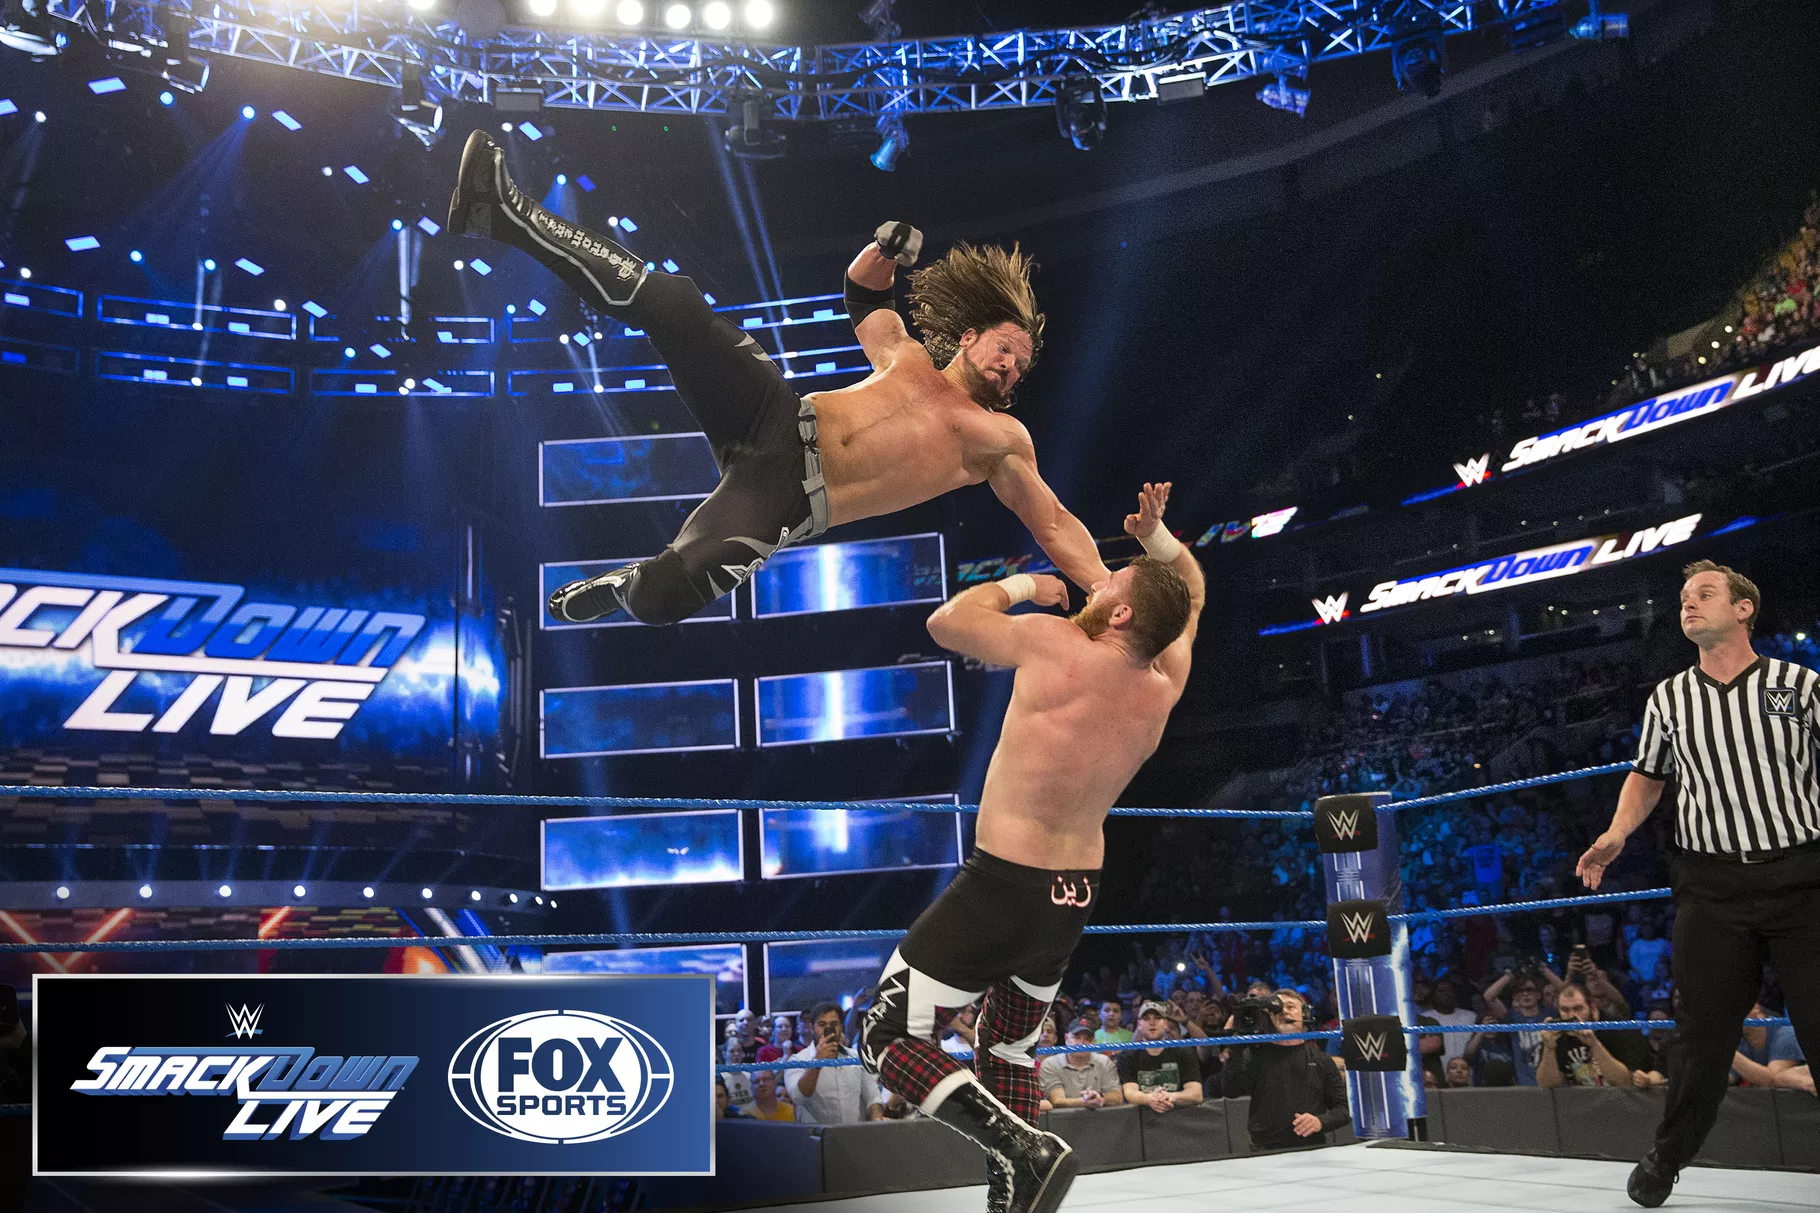 Fox to Air Pro Wrestling on Friday Nights